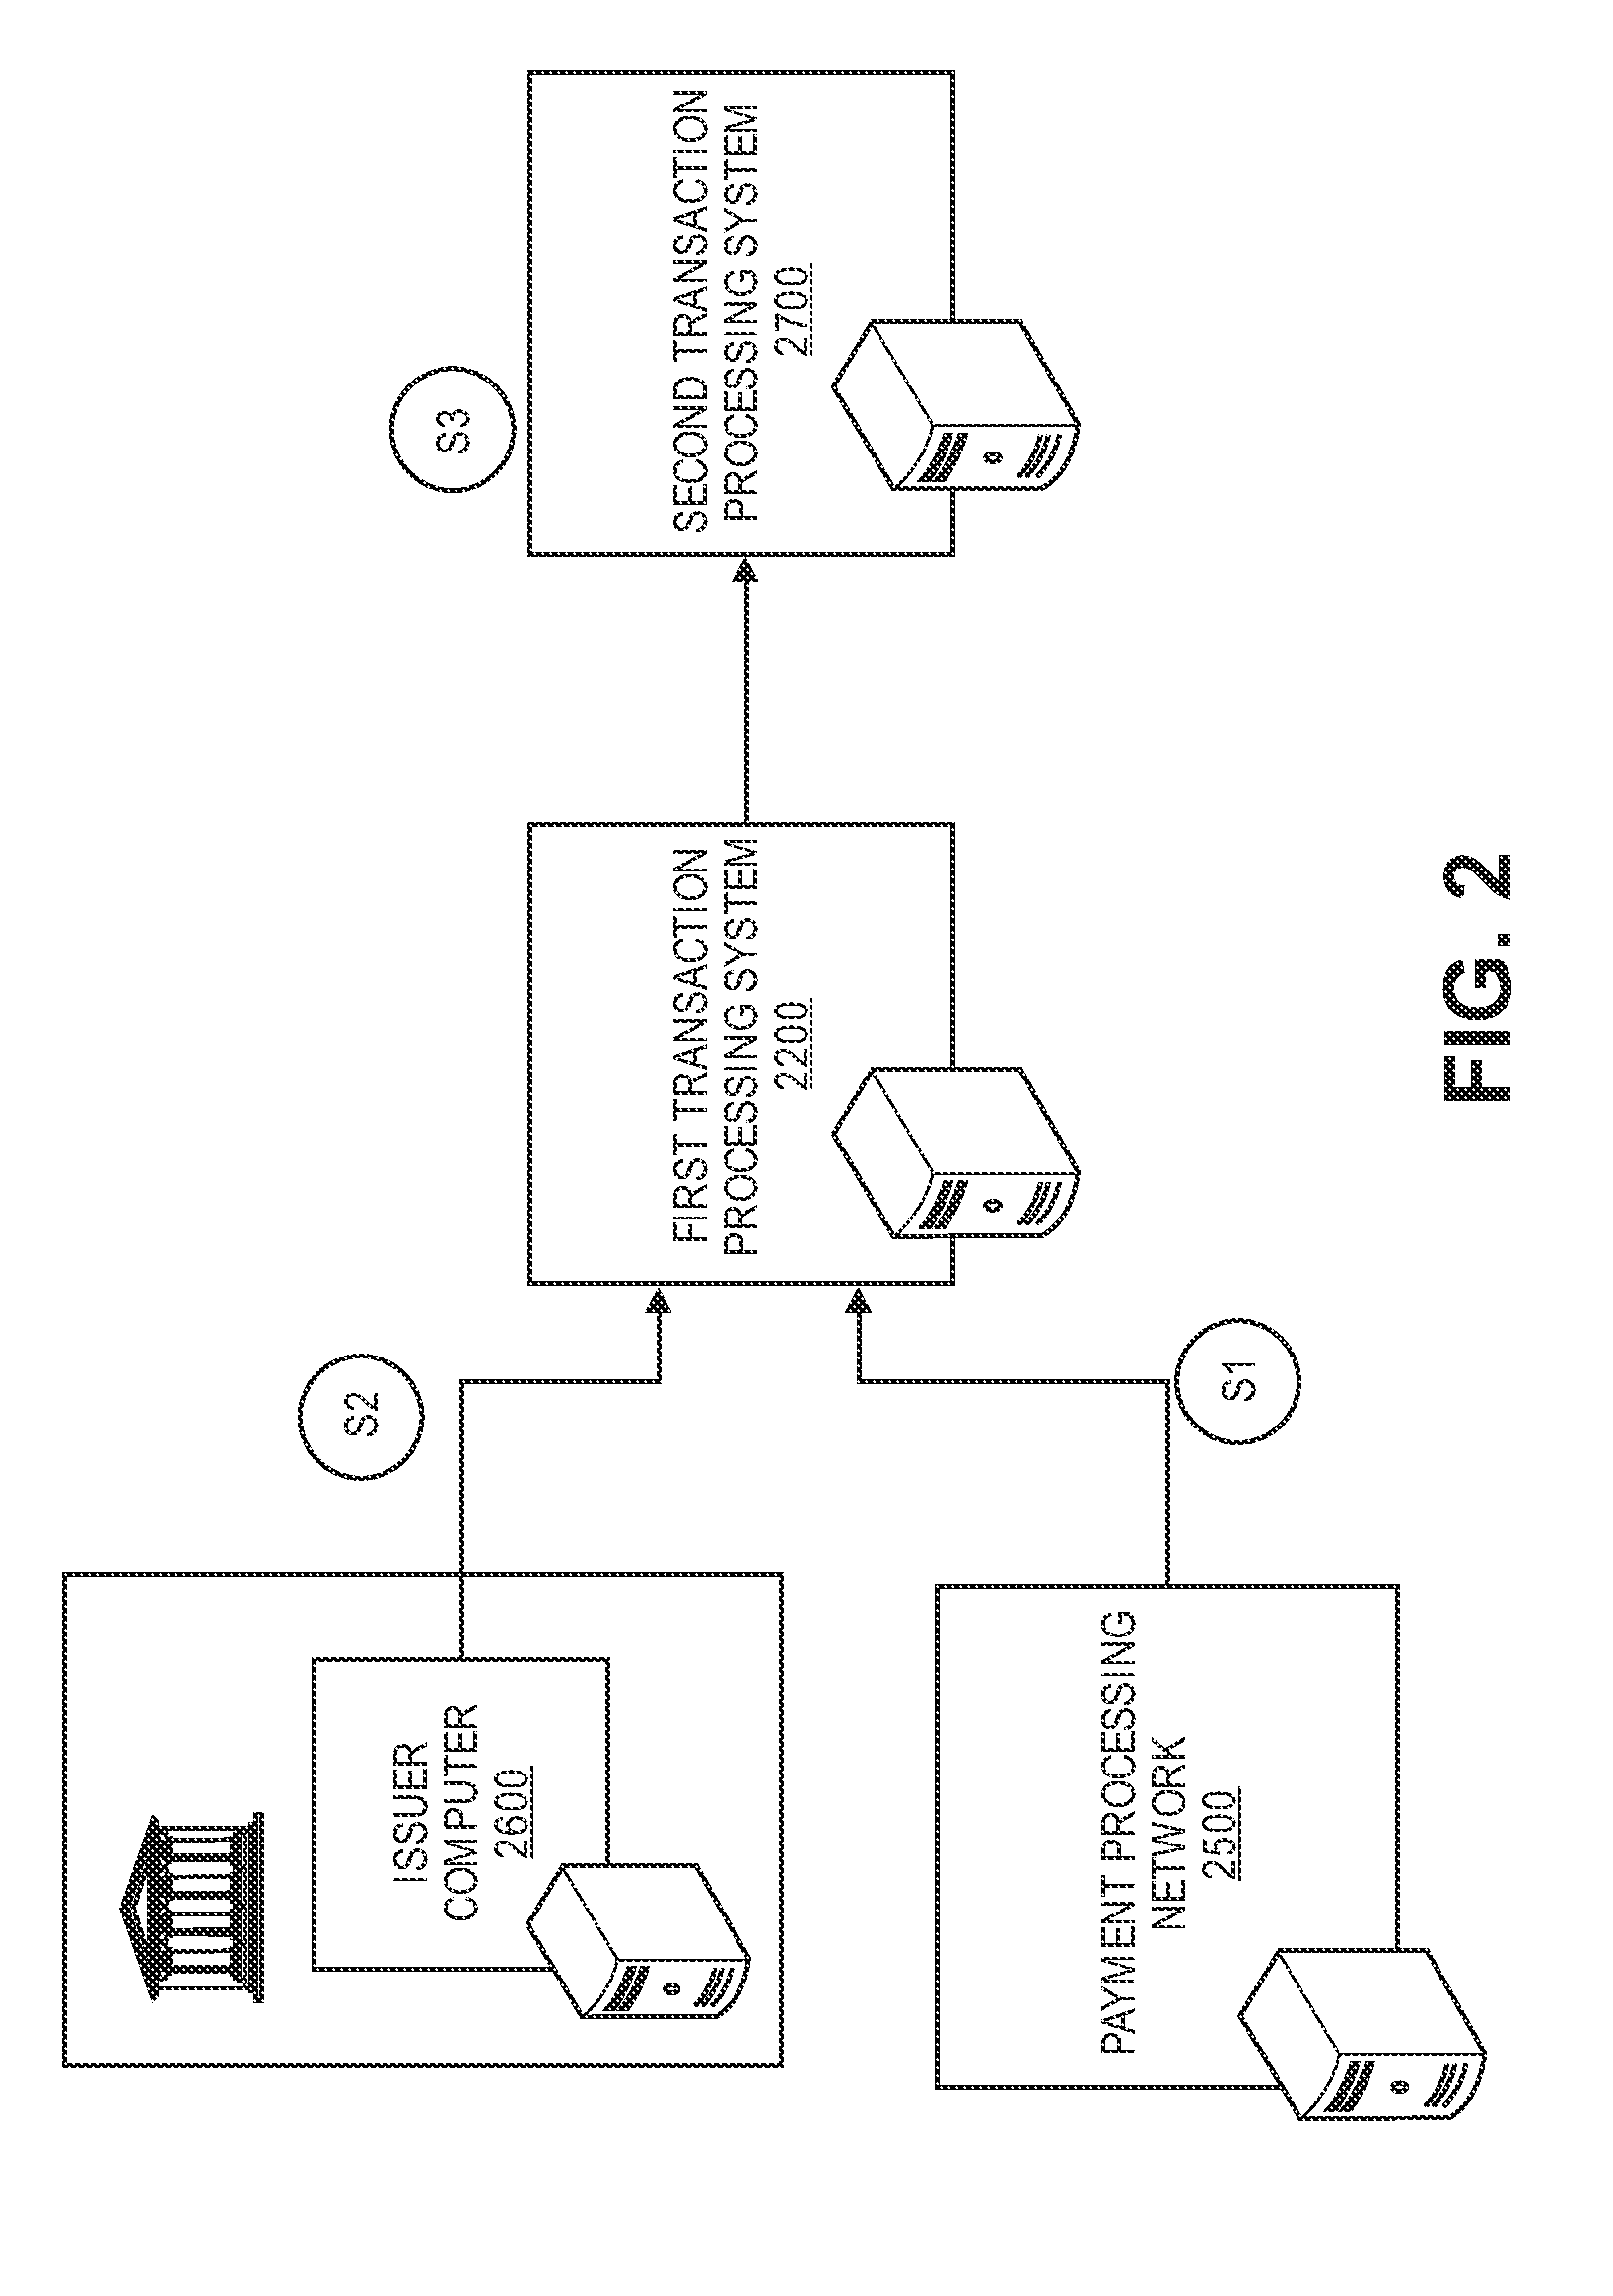 Method and System for Fraud Detection and Notification